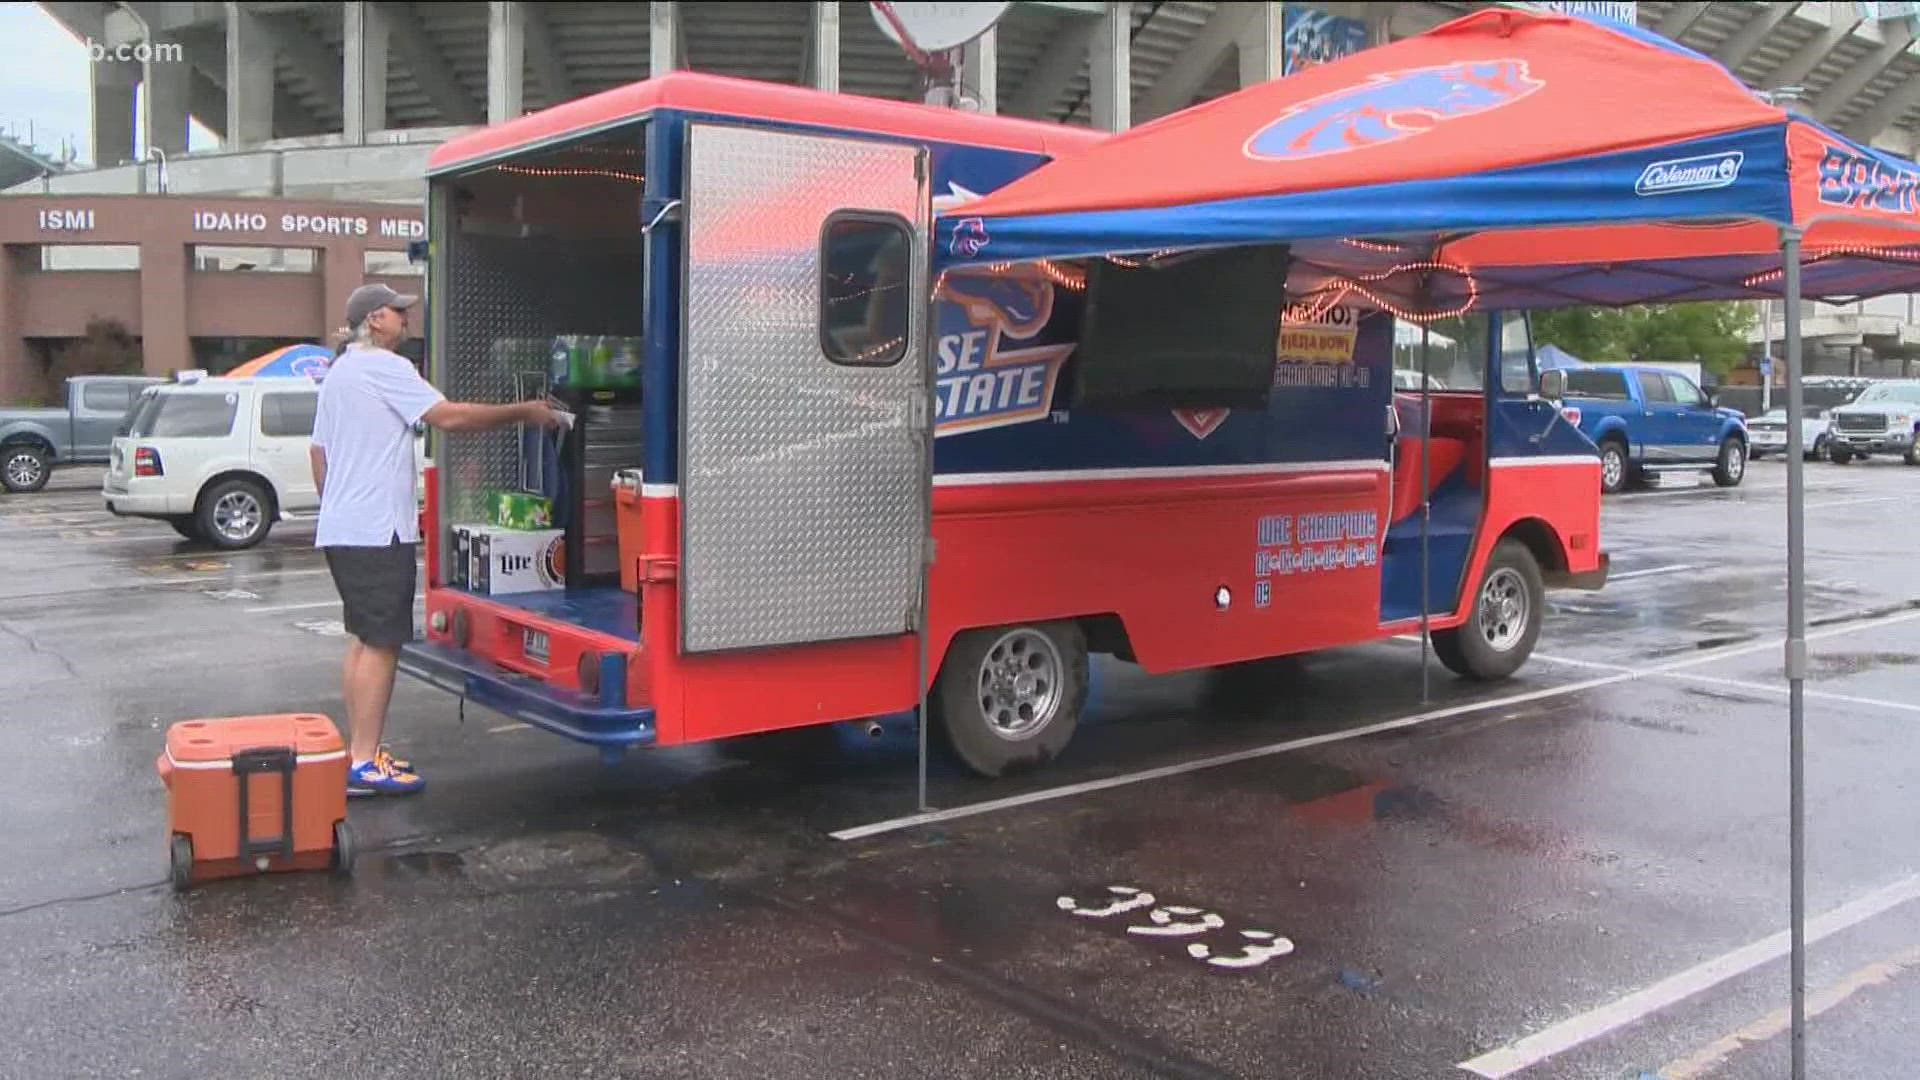 Despite some rain, Boise State fans were ready to tailgate at Albertsons Stadium for the first time in nearly two years.